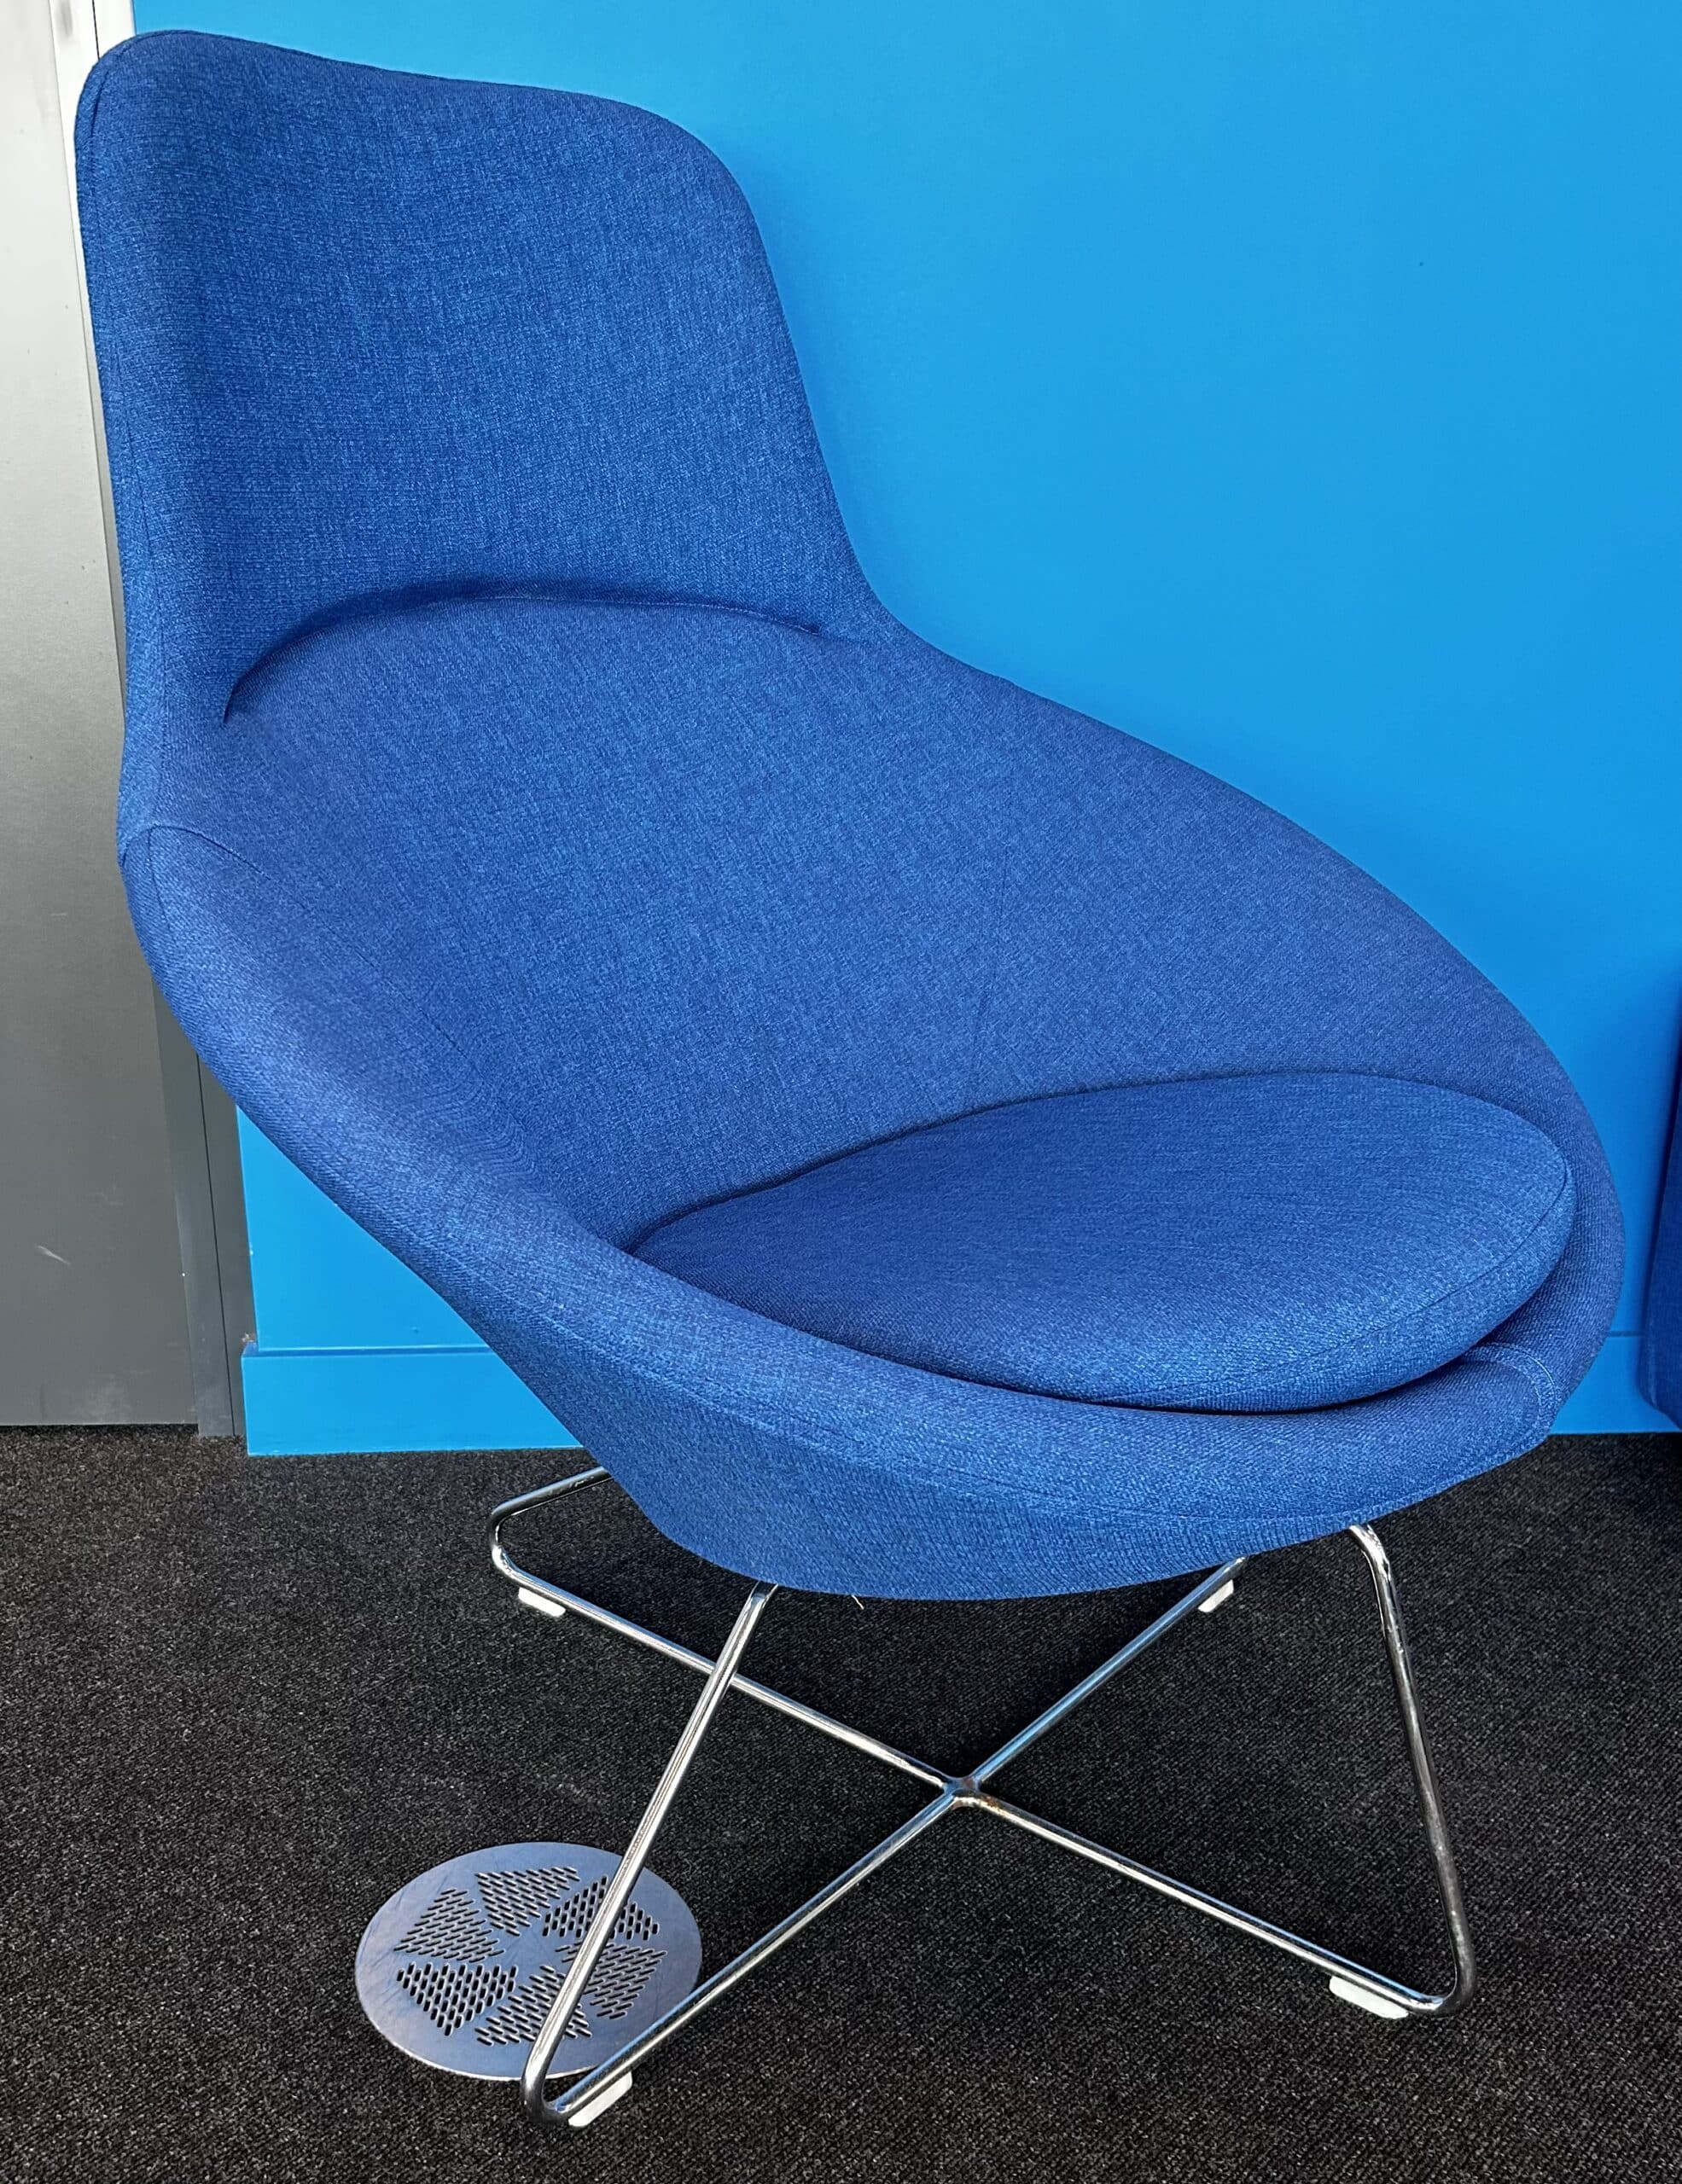 Pre-owned Allermuir Conic A632 High Back Collaborative Chair in amazing Electric Blue Fabric